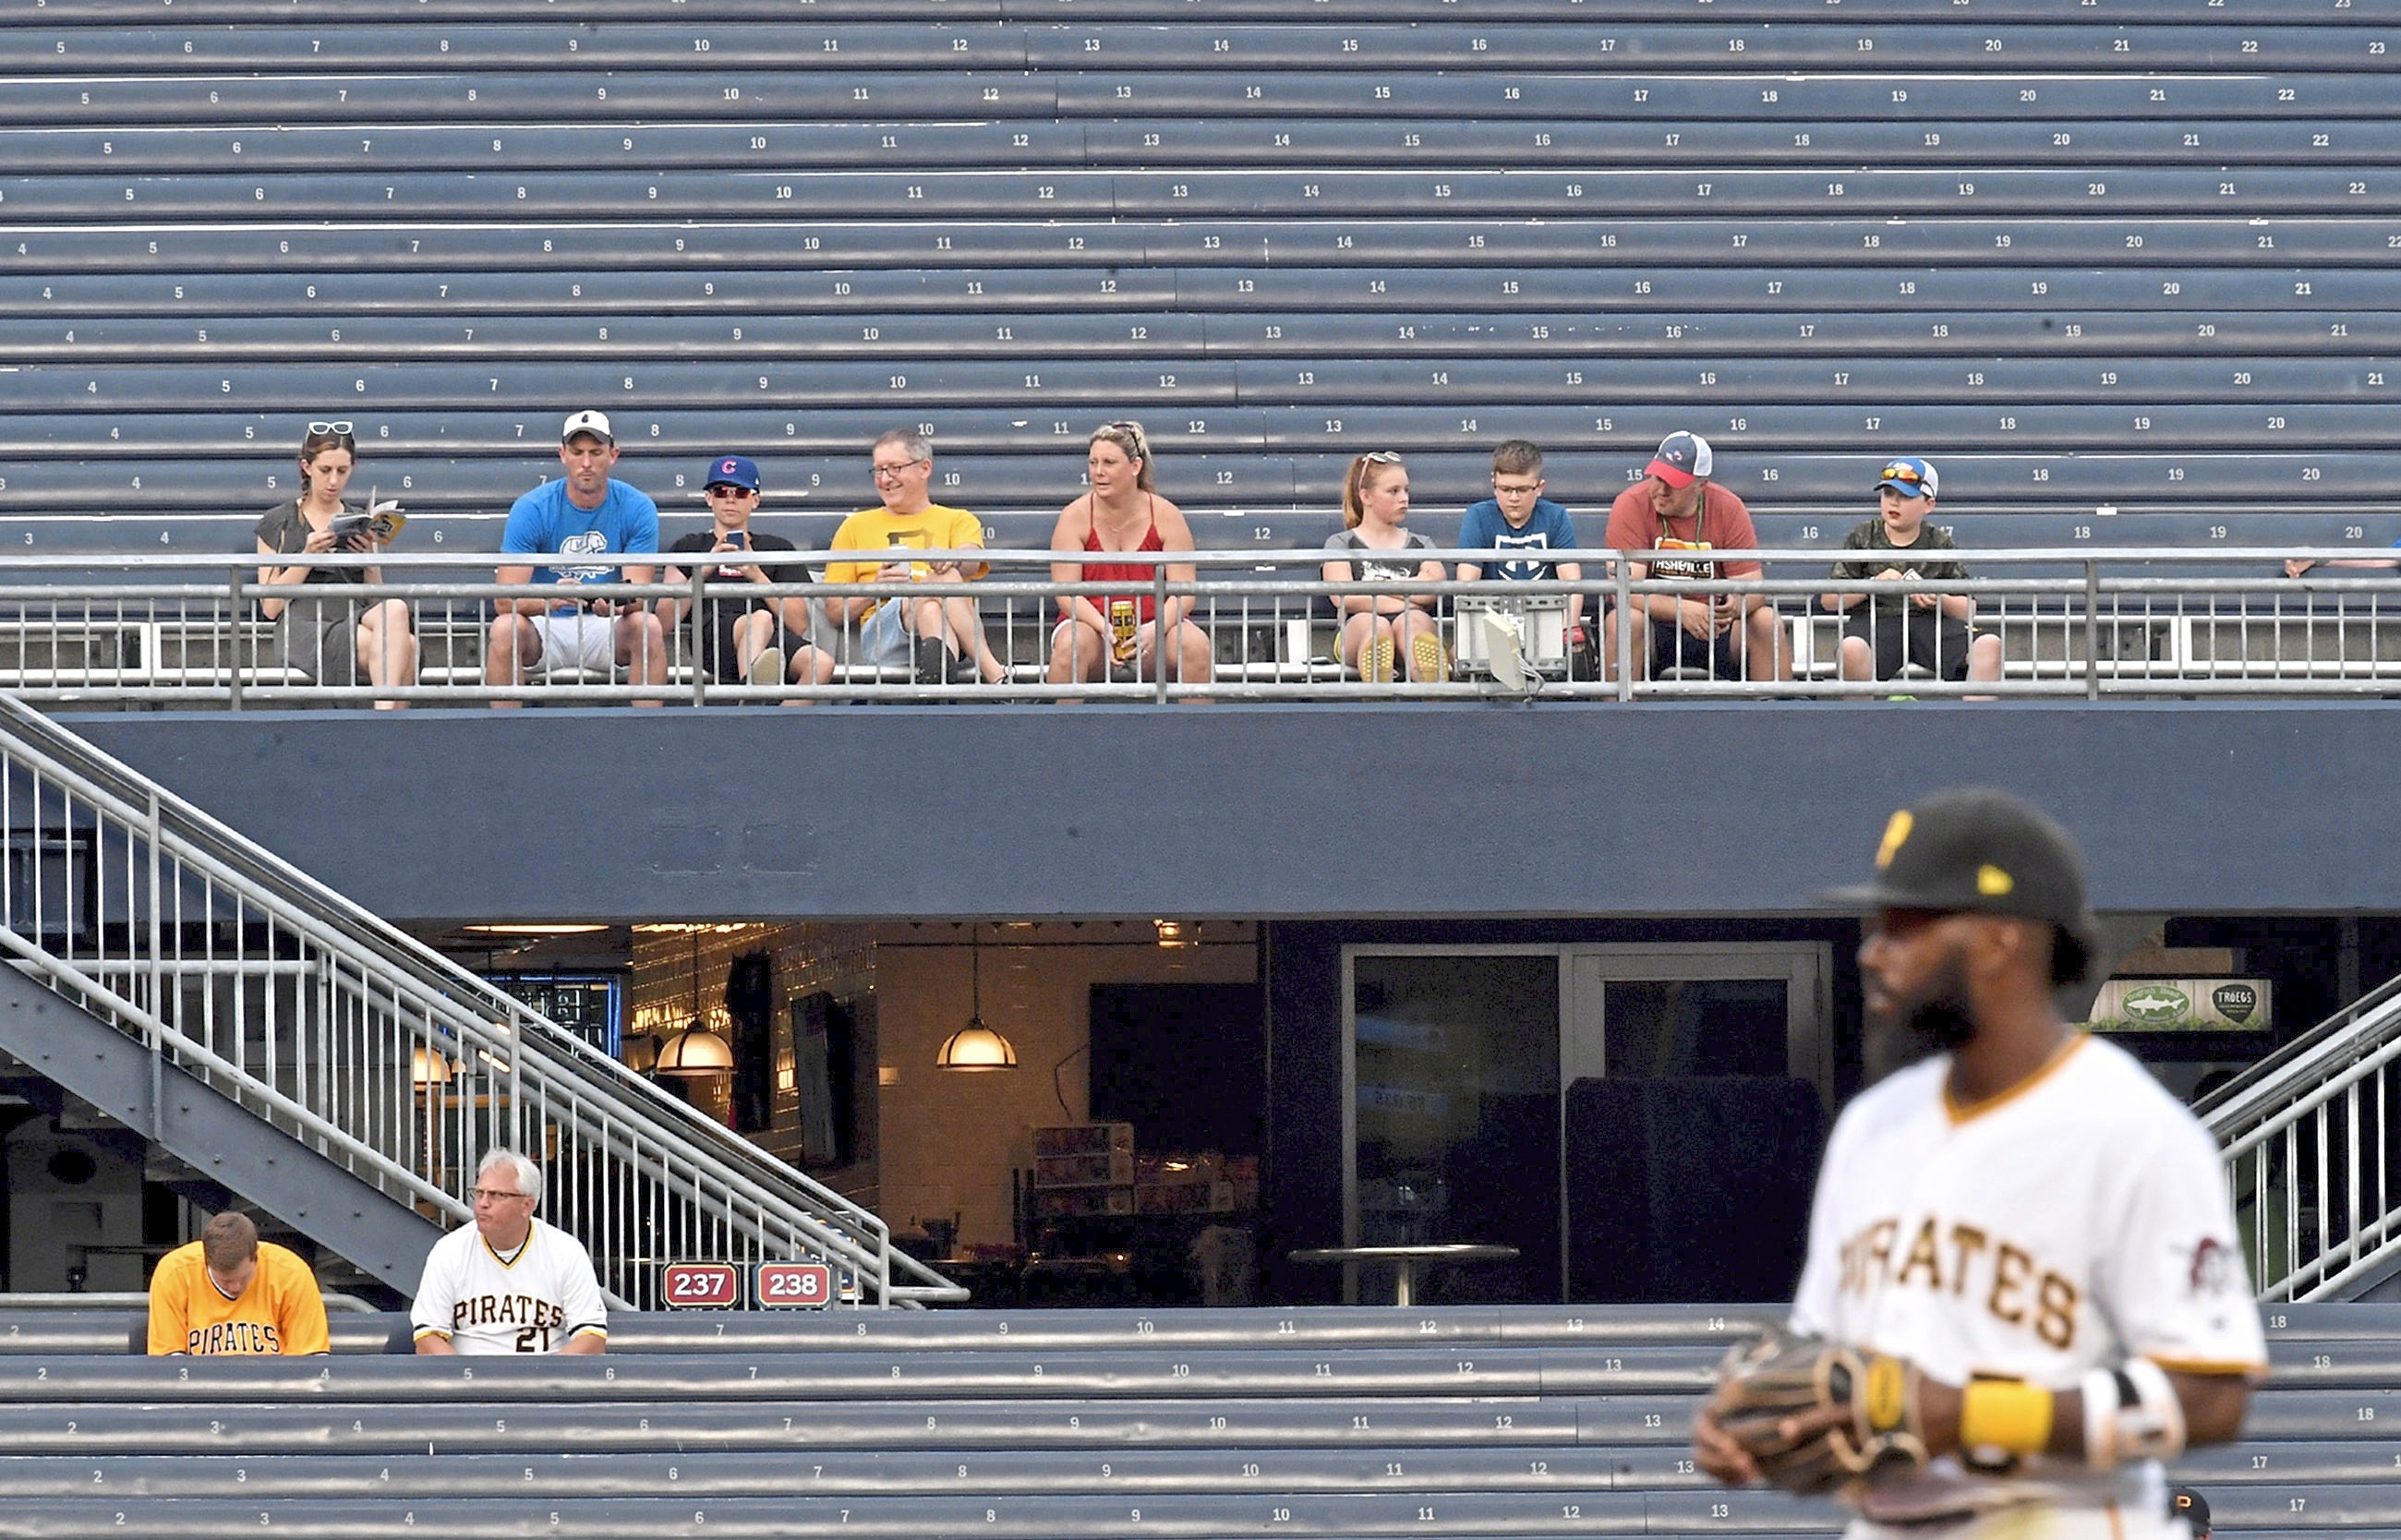 The Pirates have one of MLB's steepest attendance declines — and that's